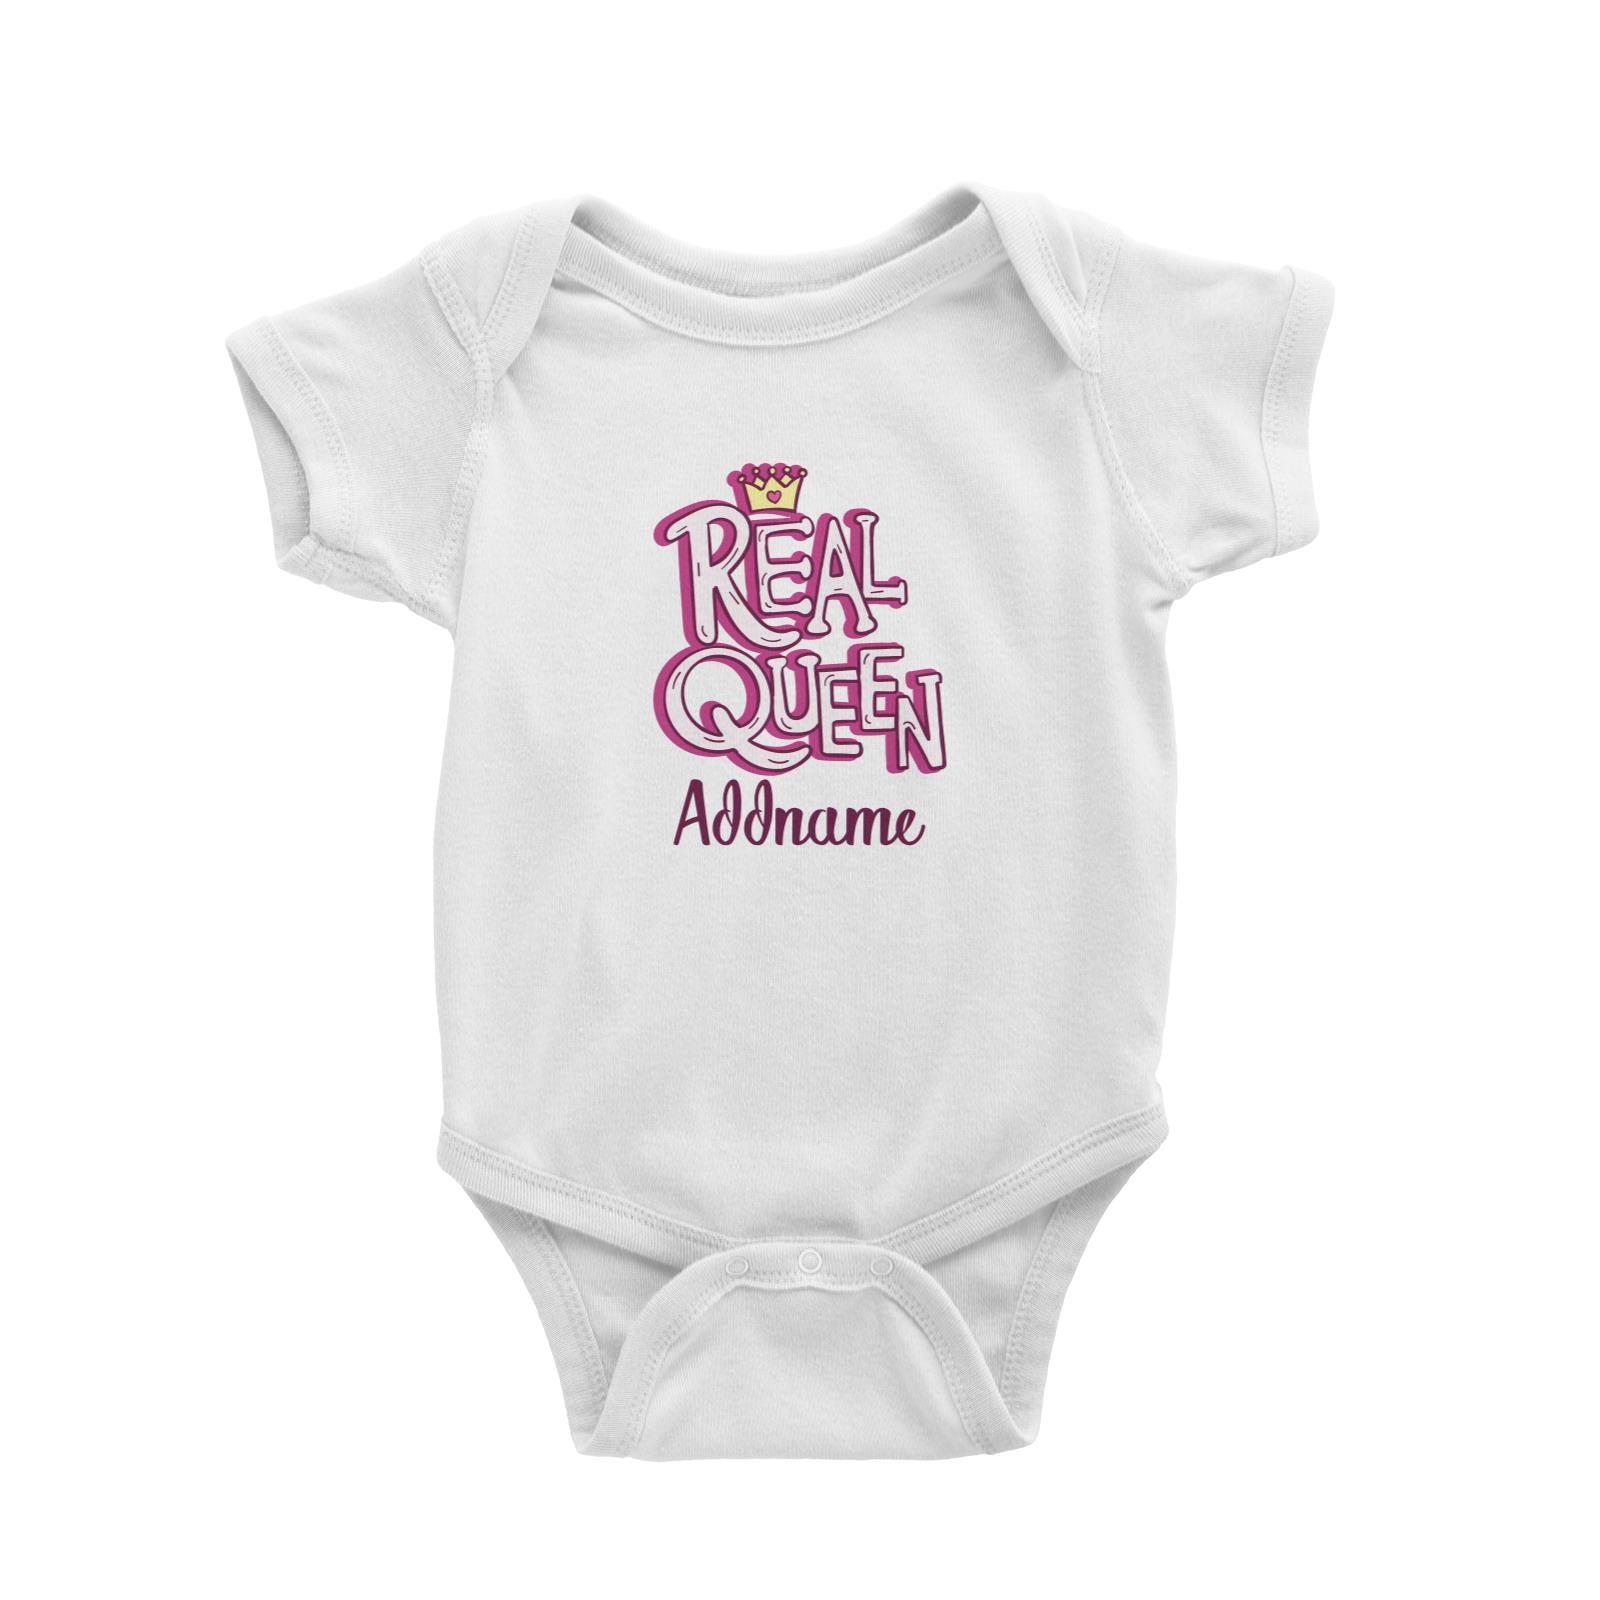 Cool Cute Words Real Queen Addname Baby Romper